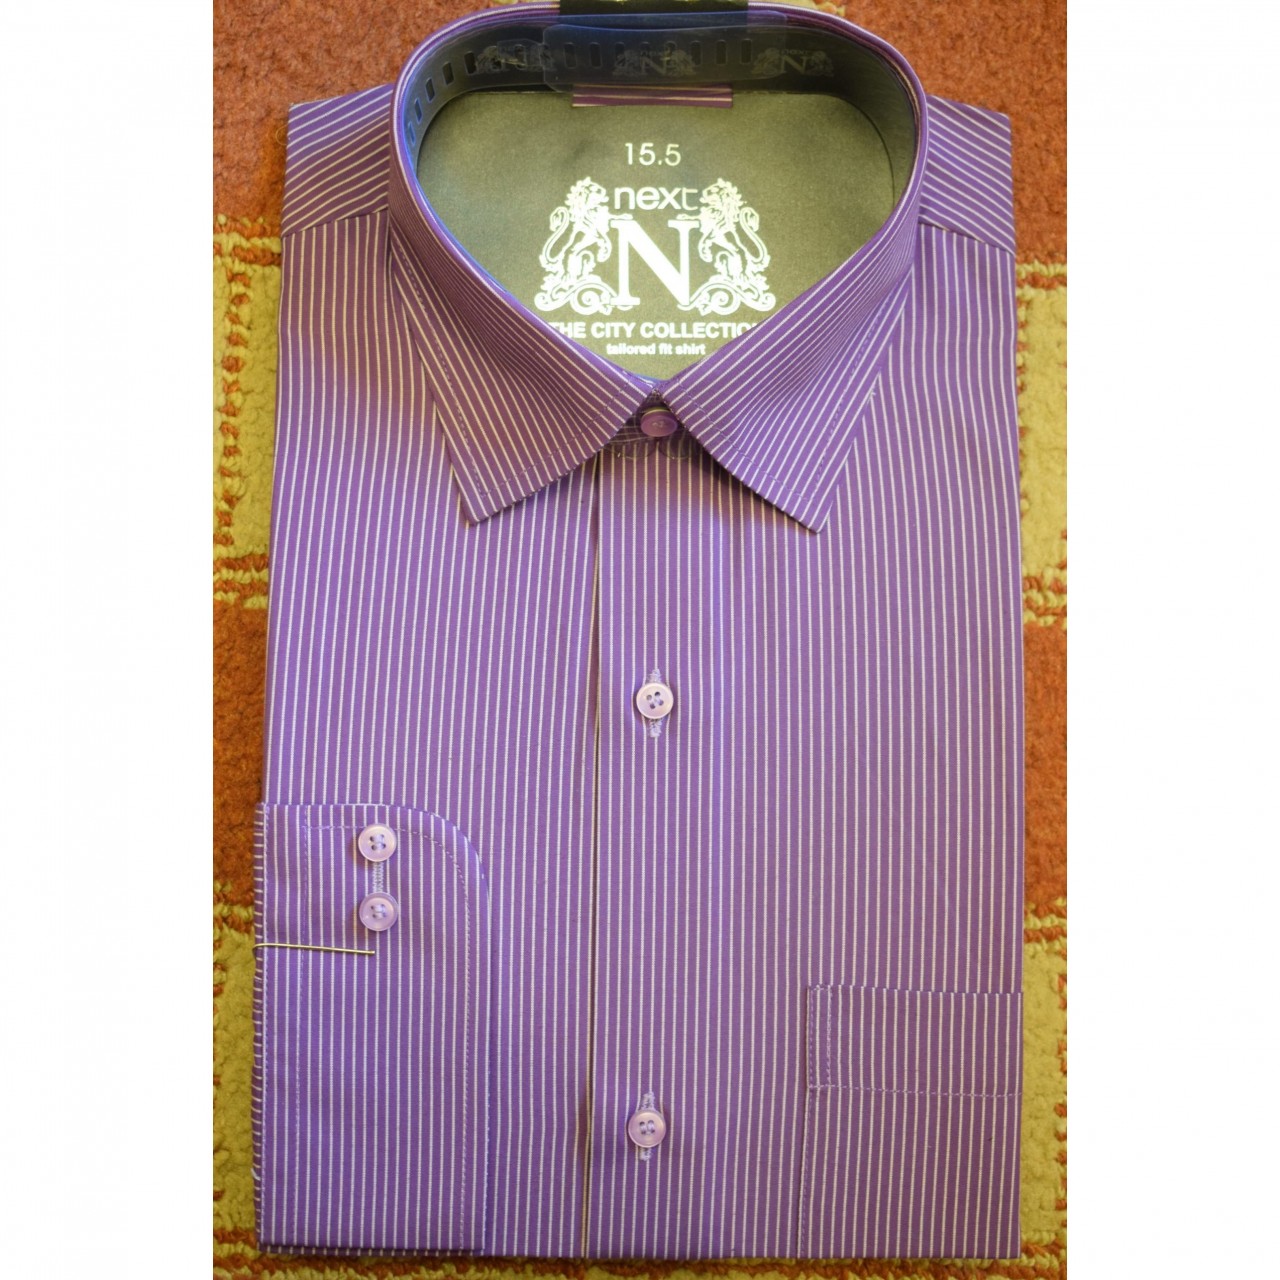 Formal Shirt With Double Needle Stitching For Men - Purple